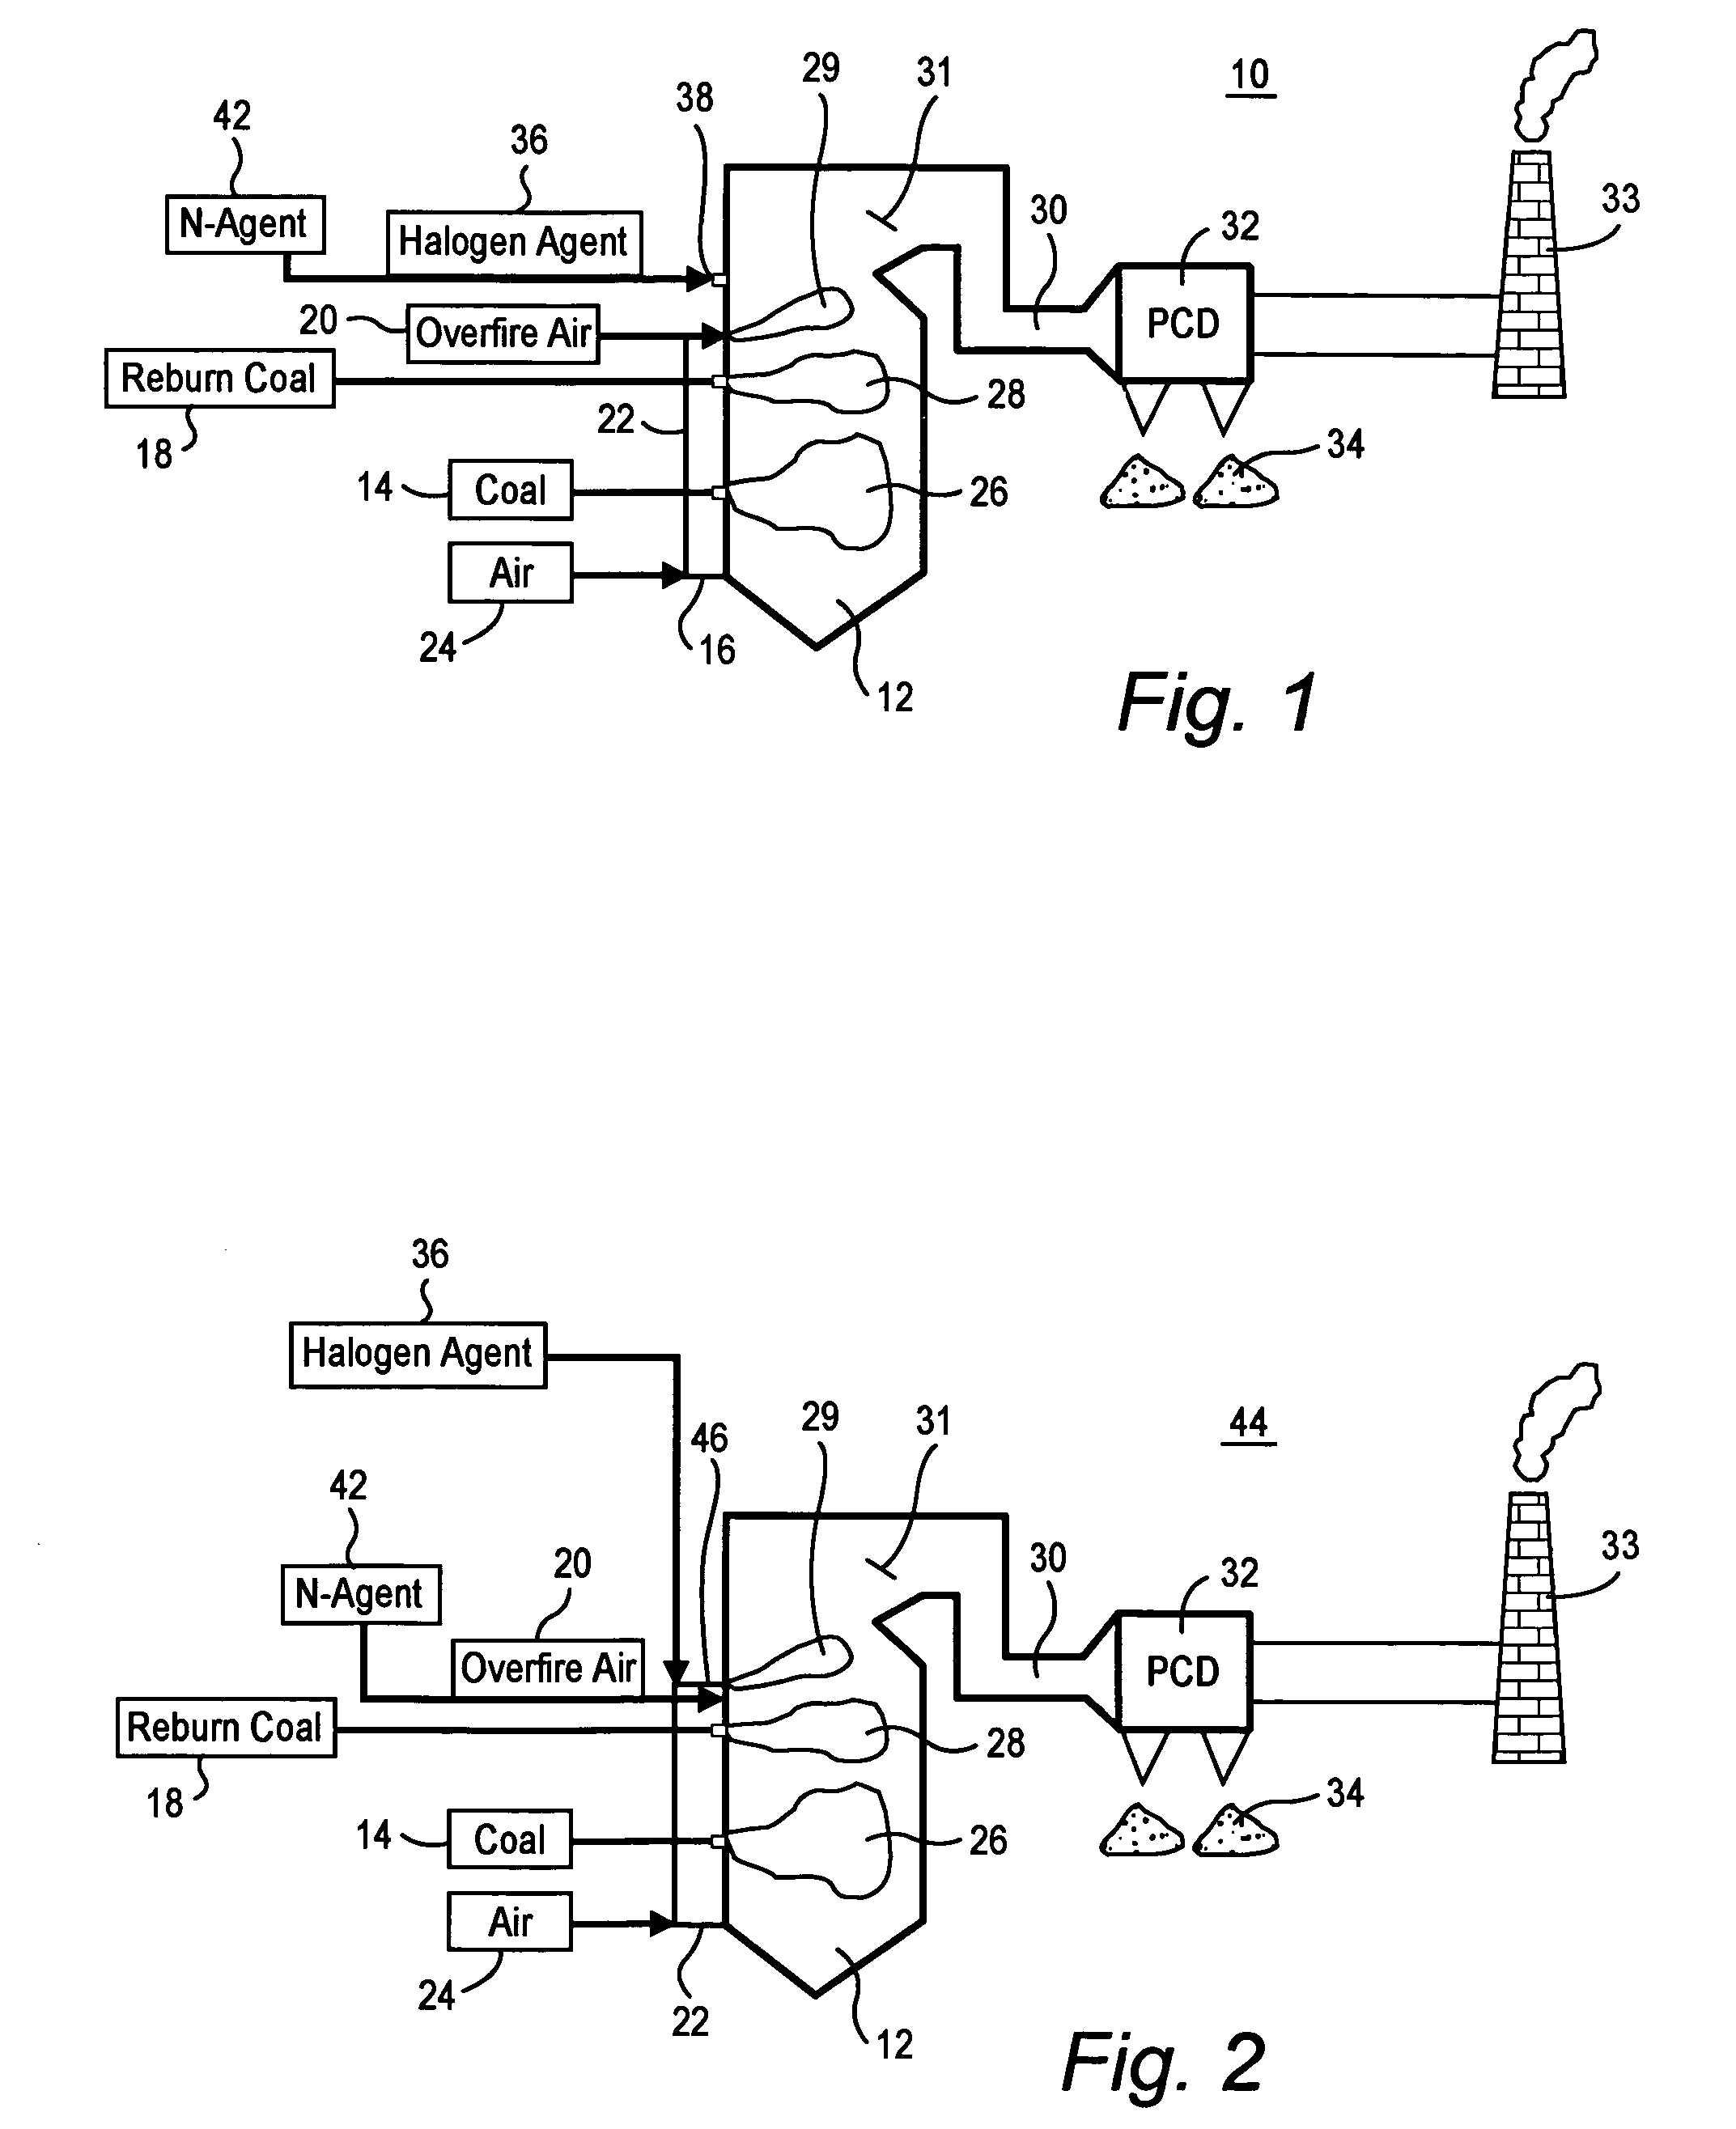 Method for removal of mercury emissions from coal combustion